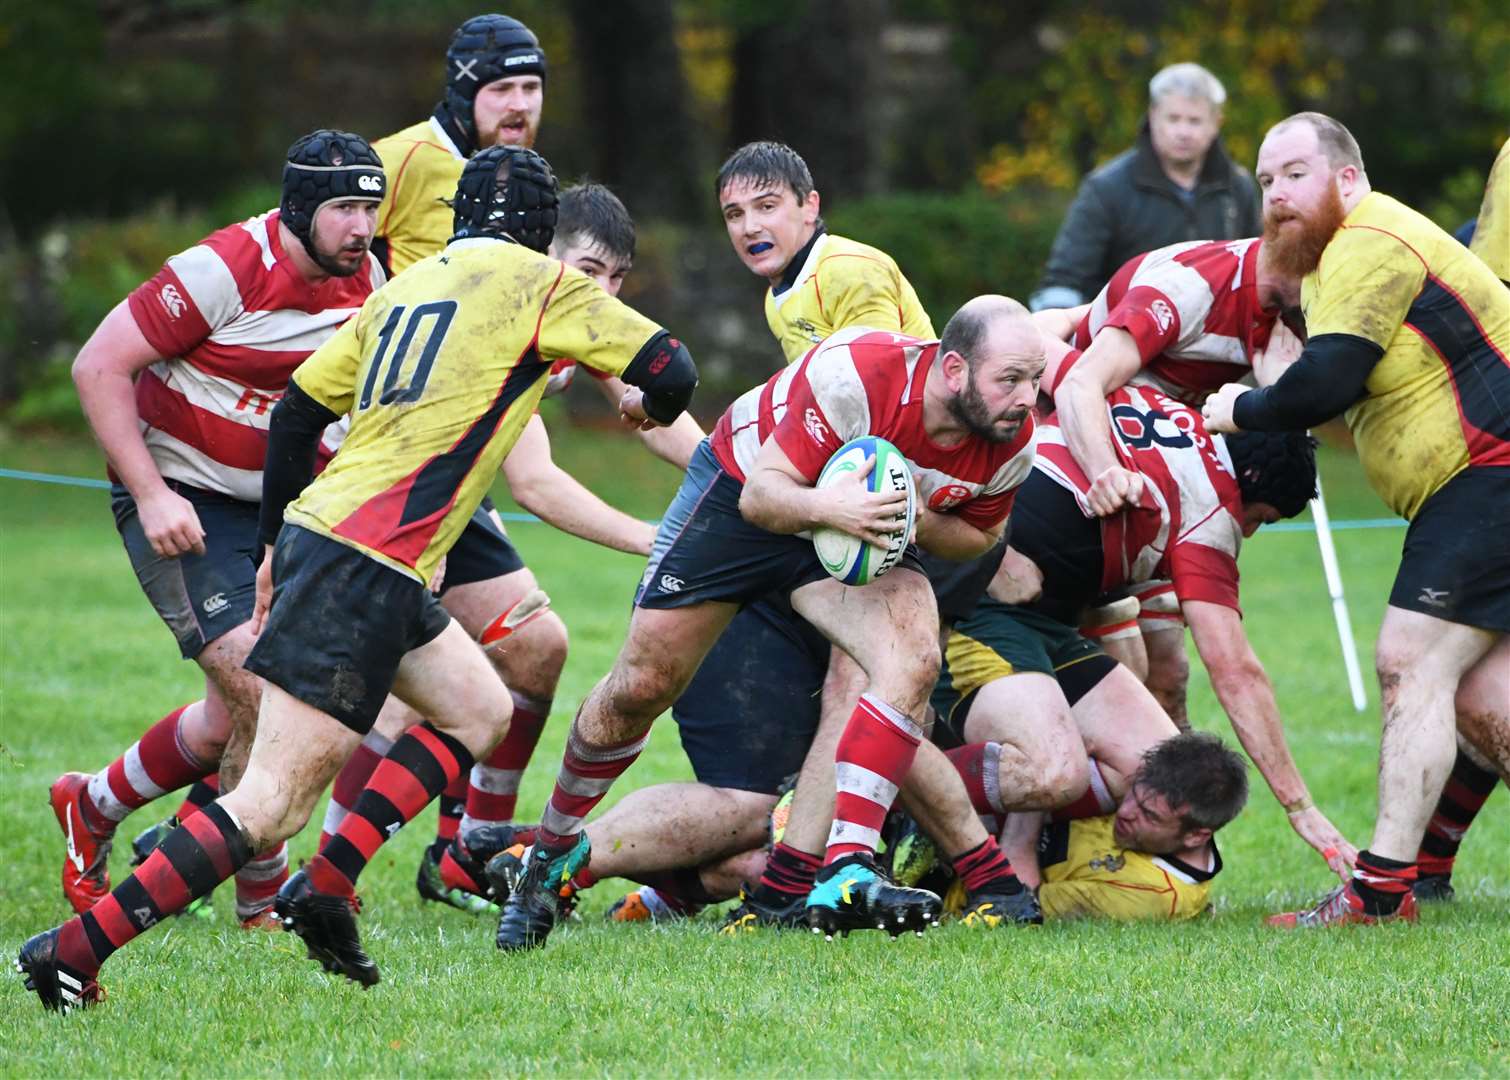 North rugby could benefit from a share of £6.5 million national funding.